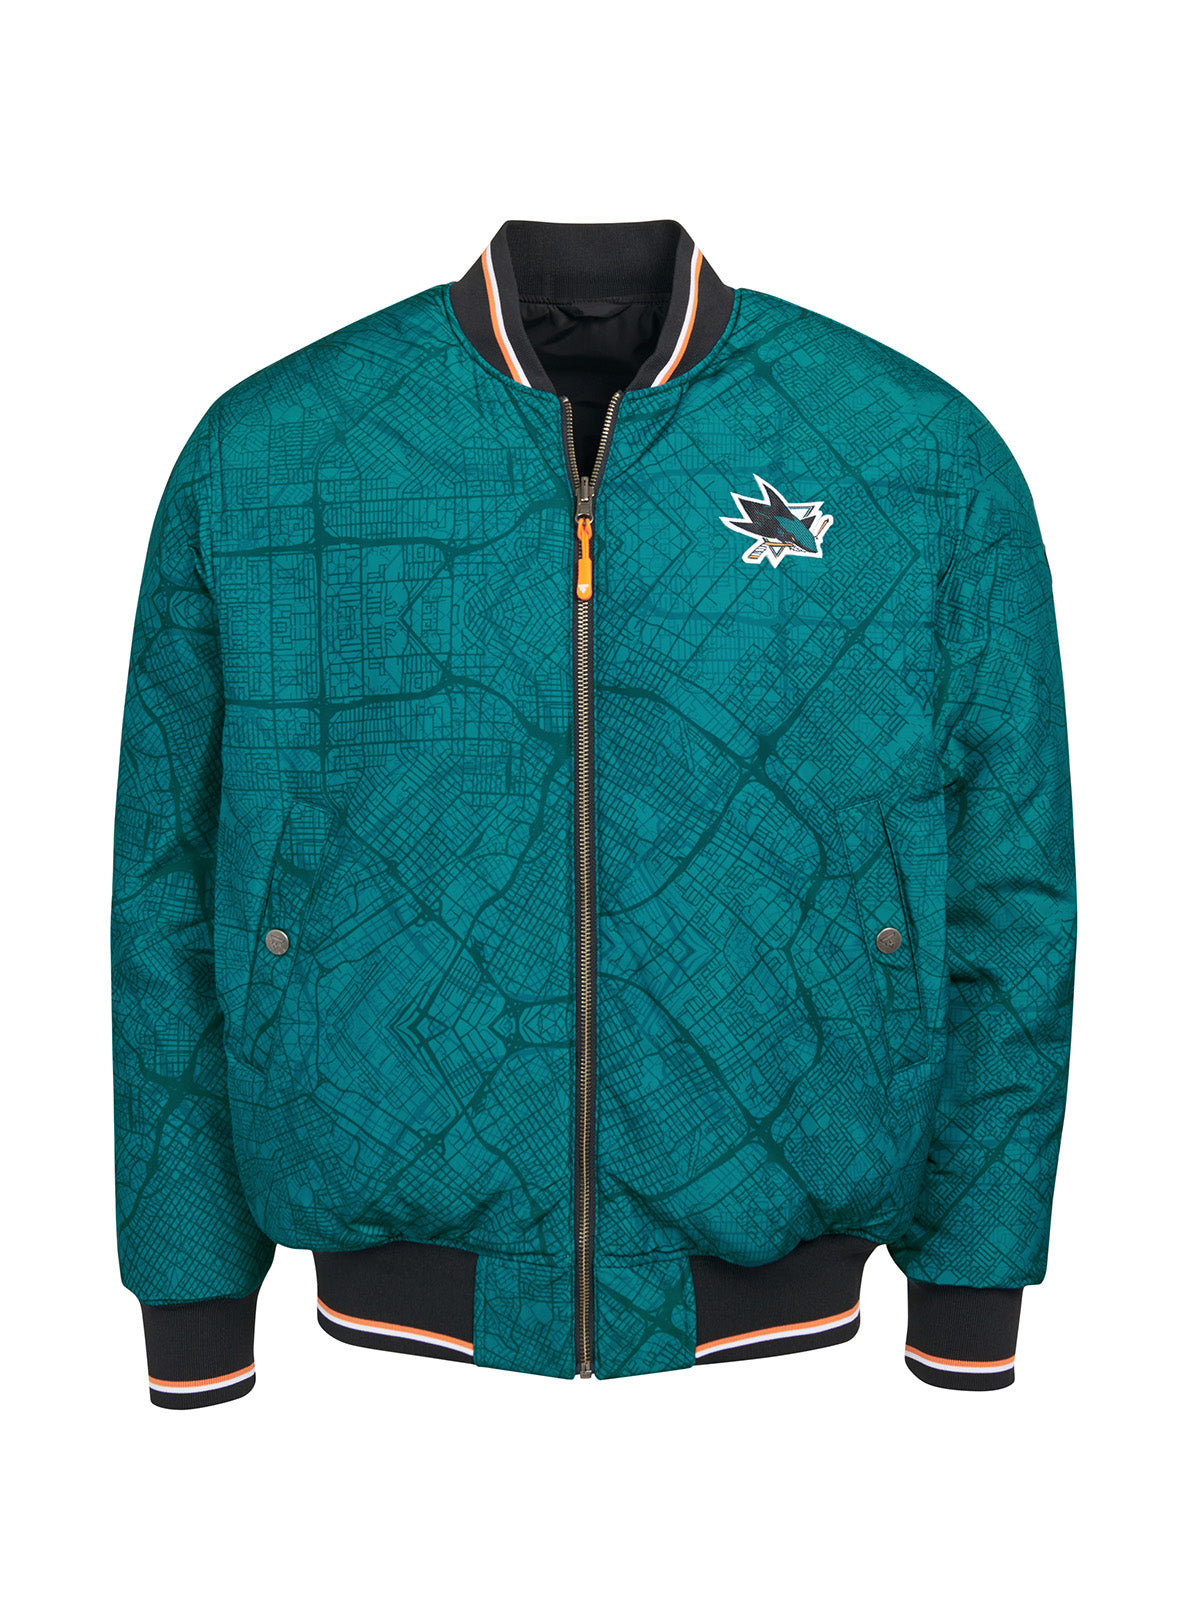 San Jose Sharks Bomber - Reversible bomber jacket featuring the iconic San Jose Sharks logo with ribbed cuffs, collar and hem in the team colors